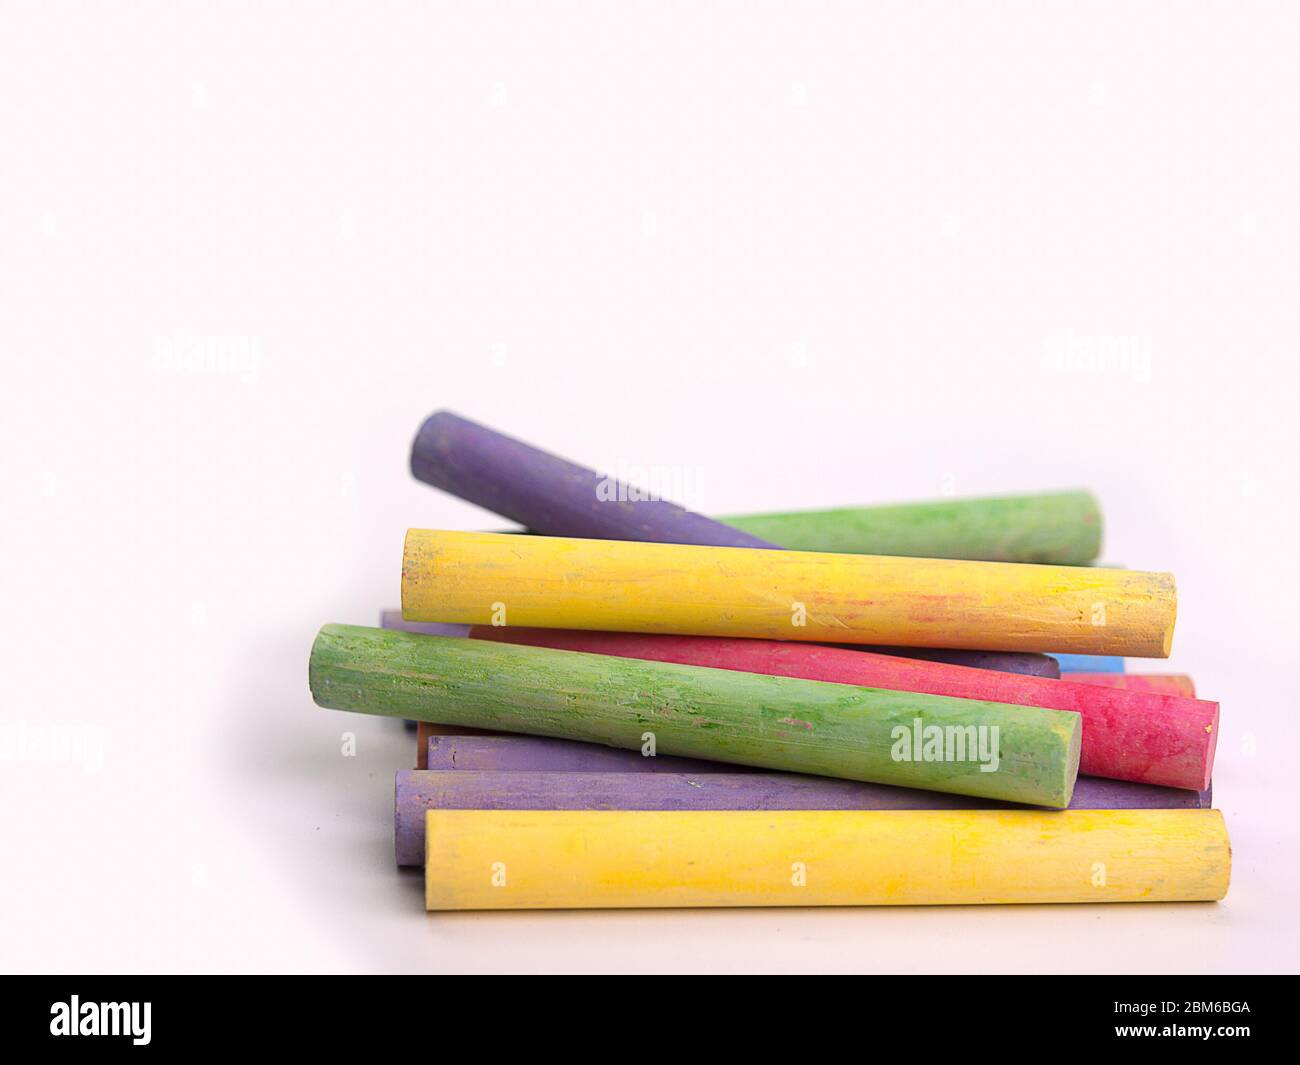 Chalks in a Variety of Colors on White Background, Chalk Powder. Stock  Image - Image of colors, colour: 155437125